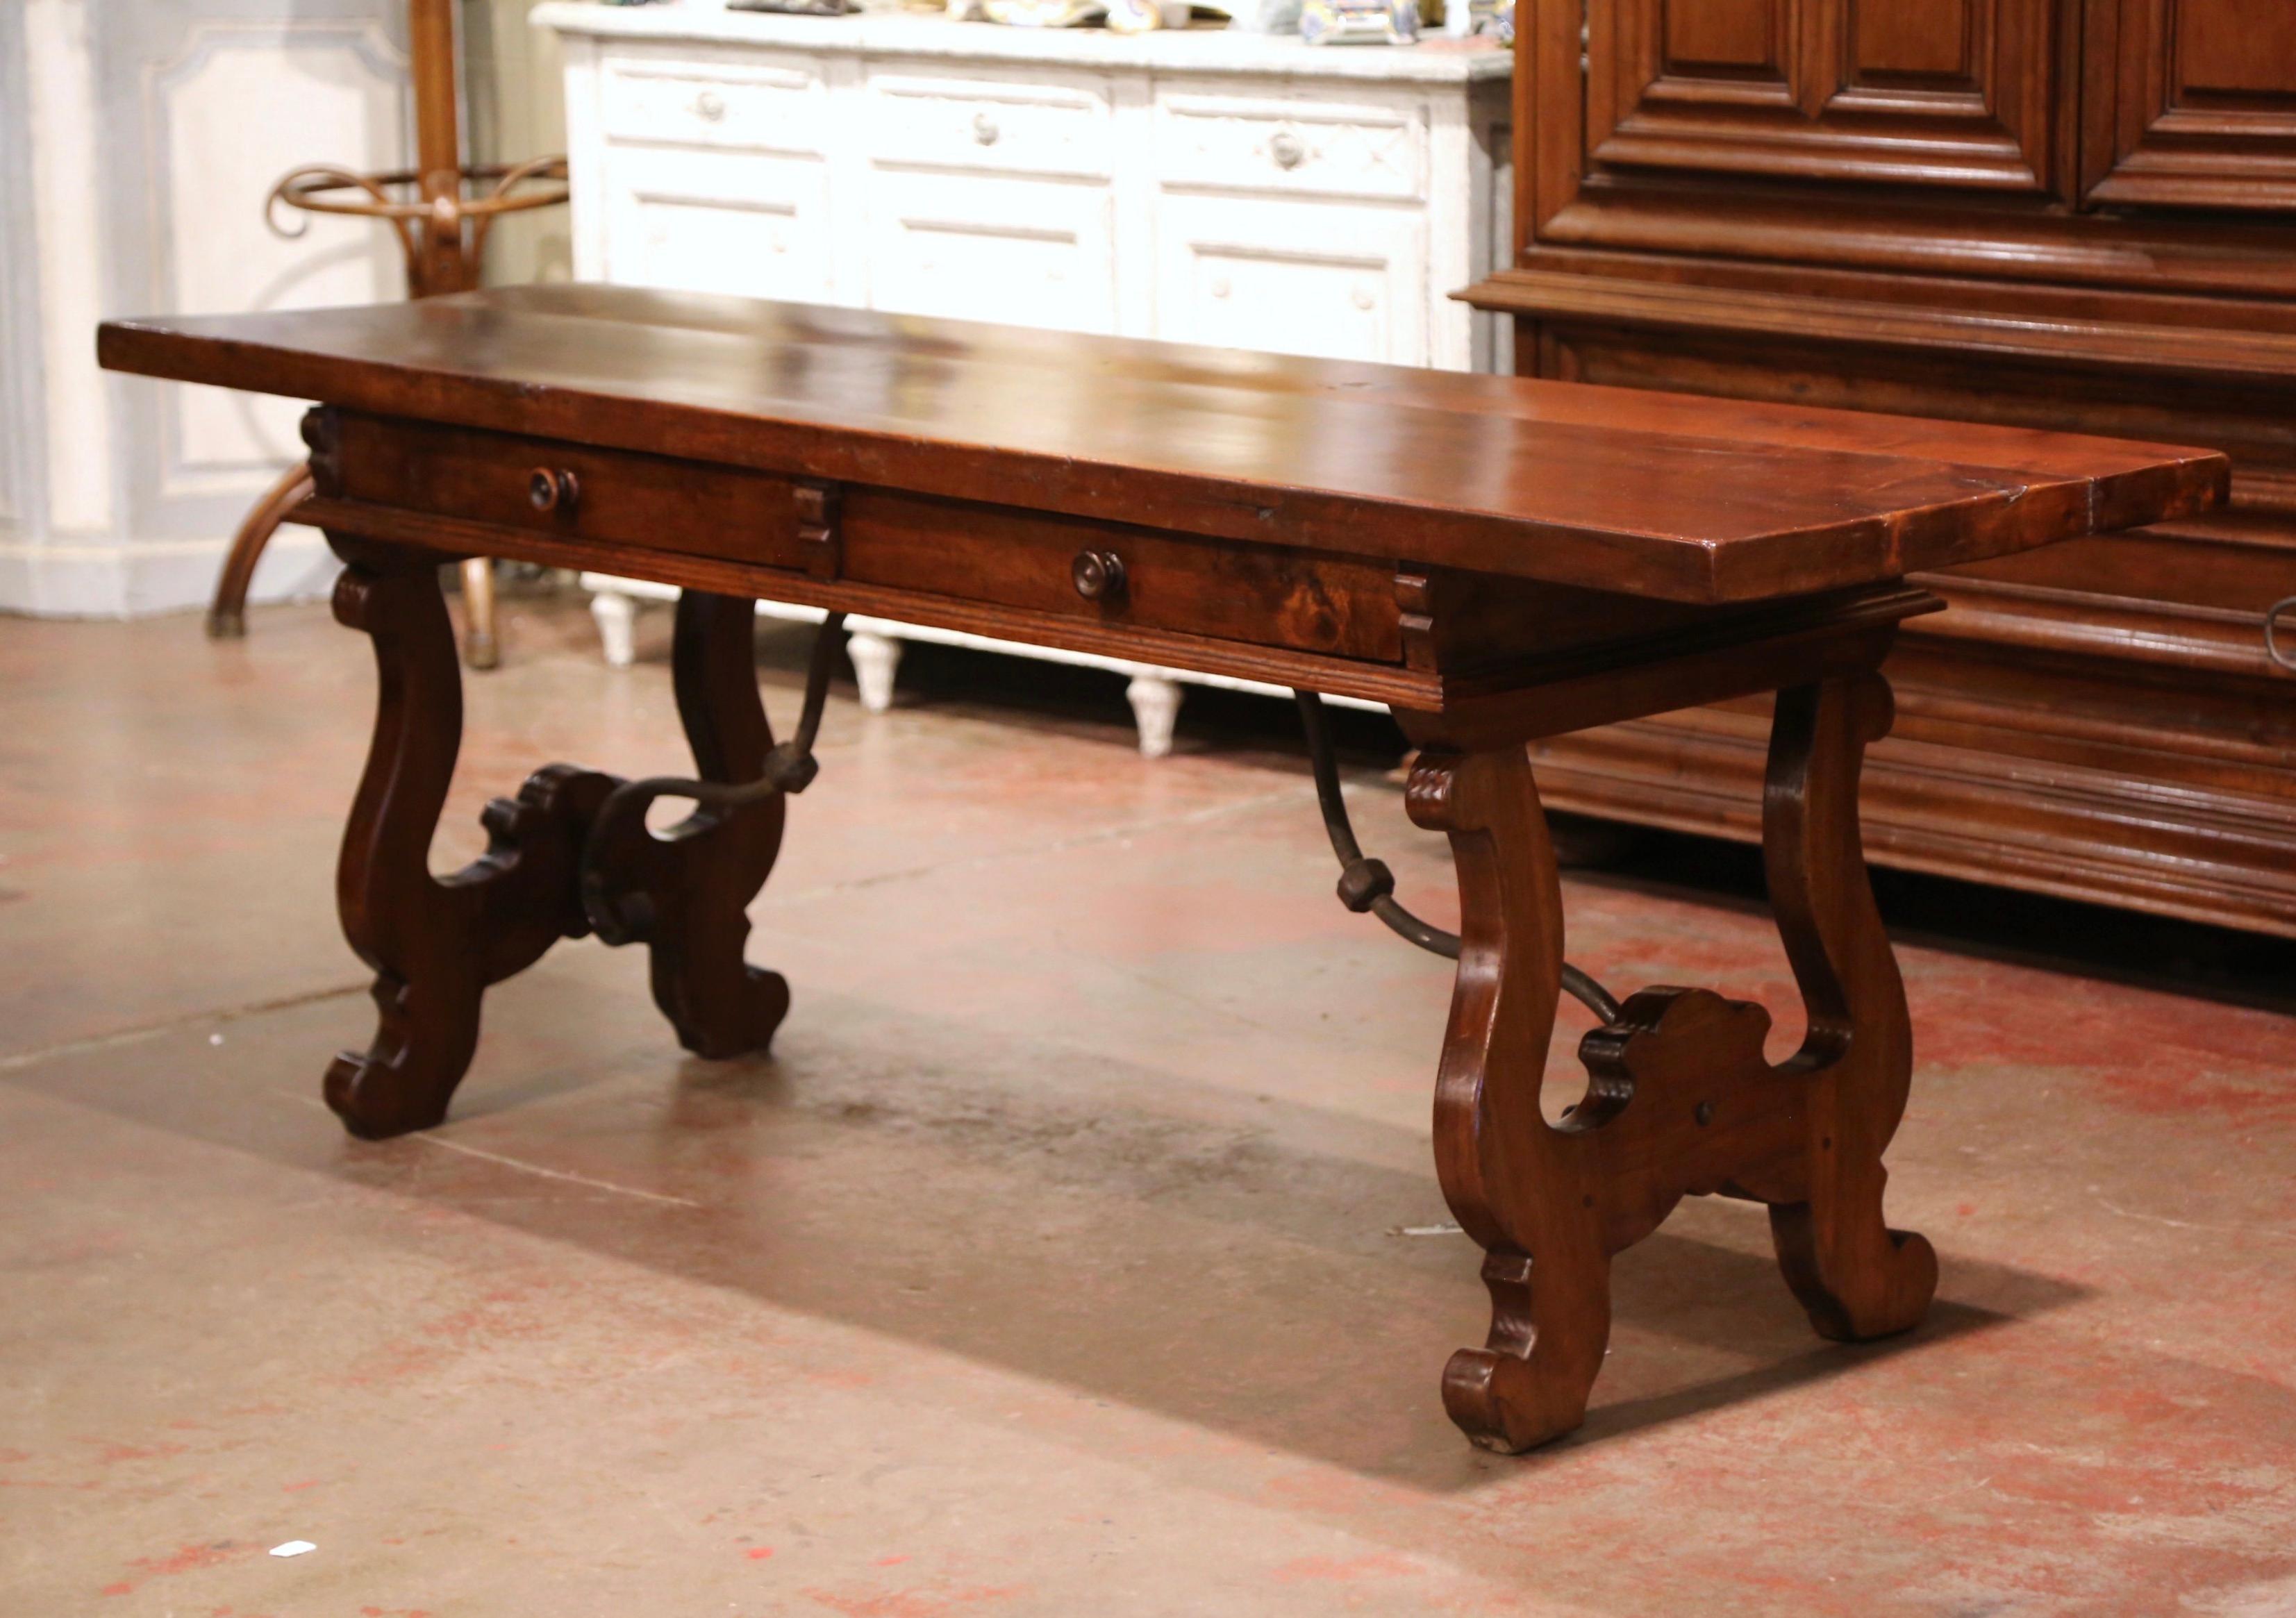 Carved in Spain circa 1870, the long trestle table stands on two intricate carved legs, connected with a thick, forged wrought iron stretcher. The elegant desk features two drawers across the front dressed with the original wooden pulls, over a